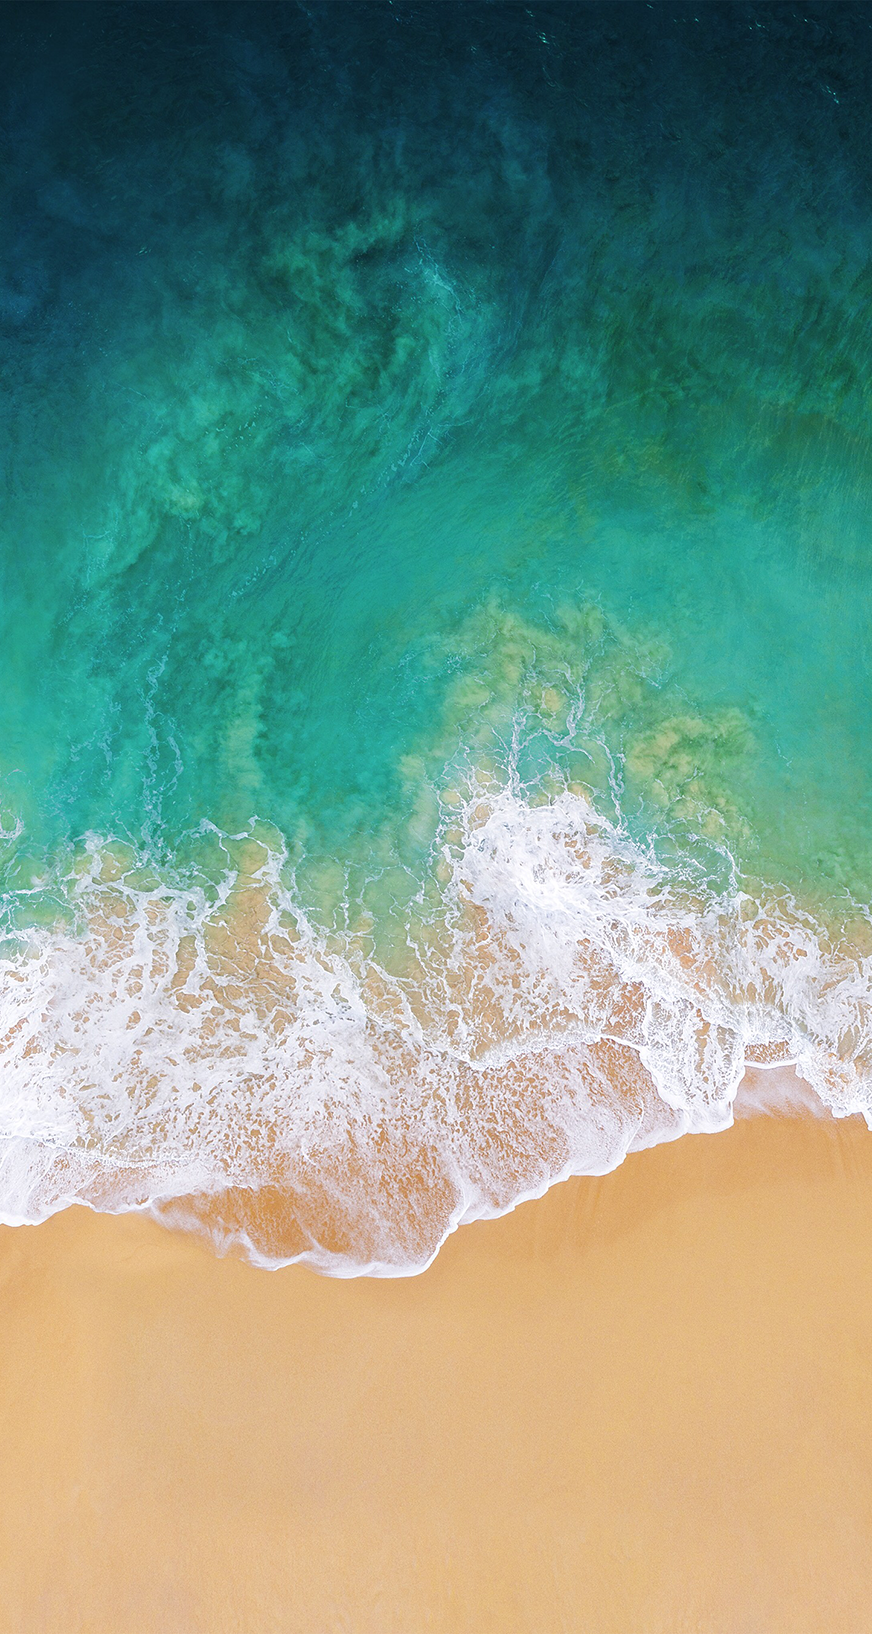 Download the Real iOS 11 Wallpaper for iPhone - iClarified